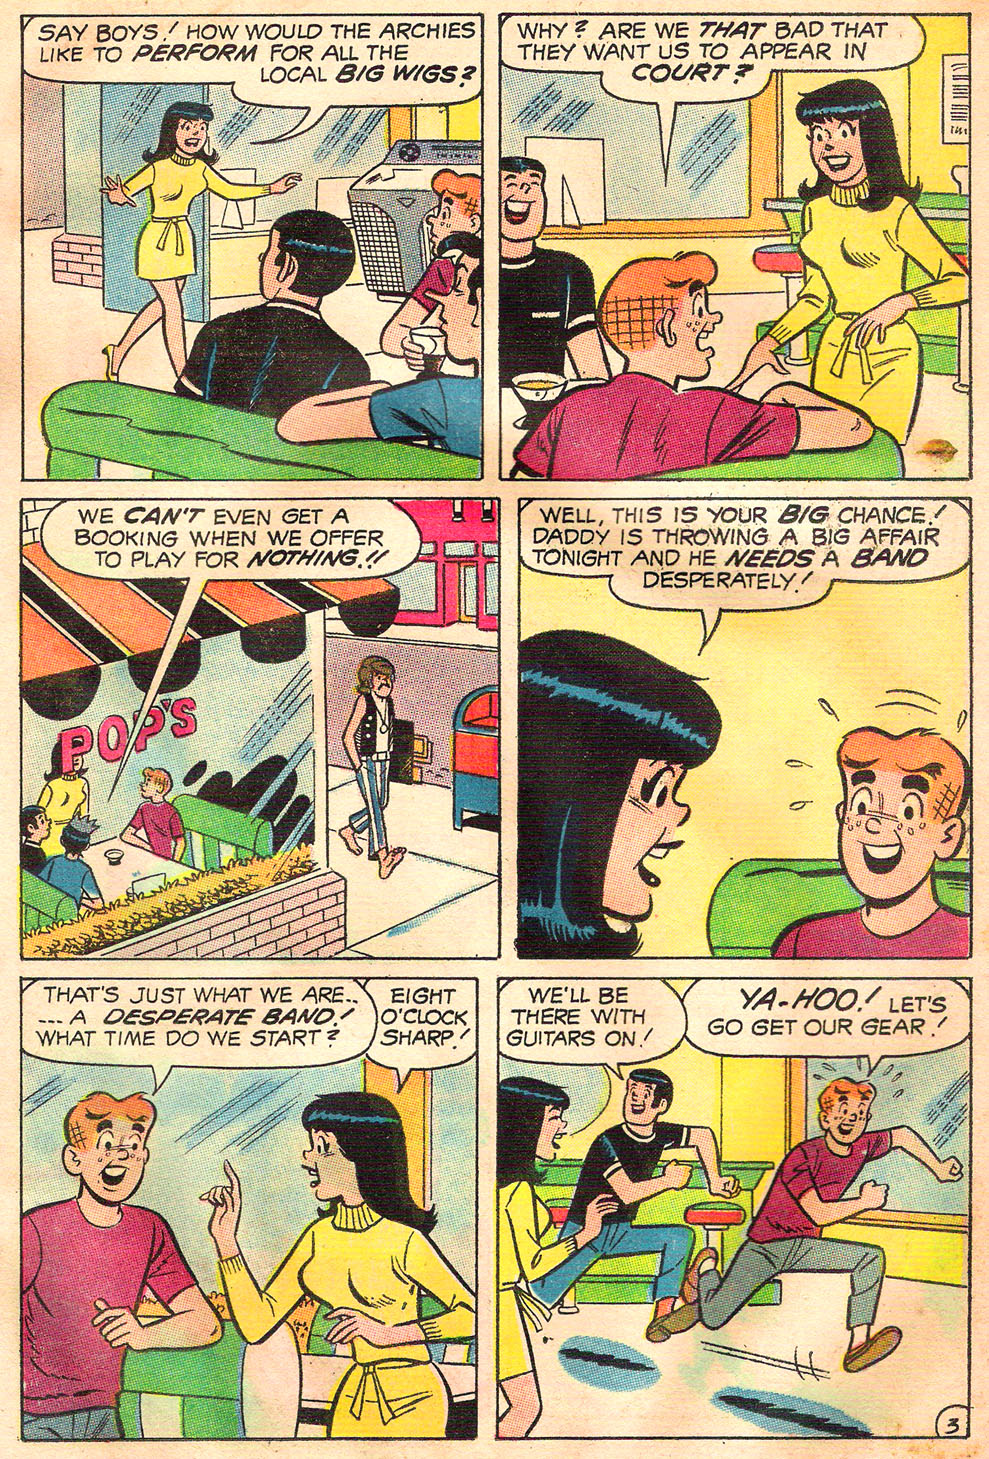 Read online Archie's Girls Betty and Veronica comic -  Issue #157 - 15